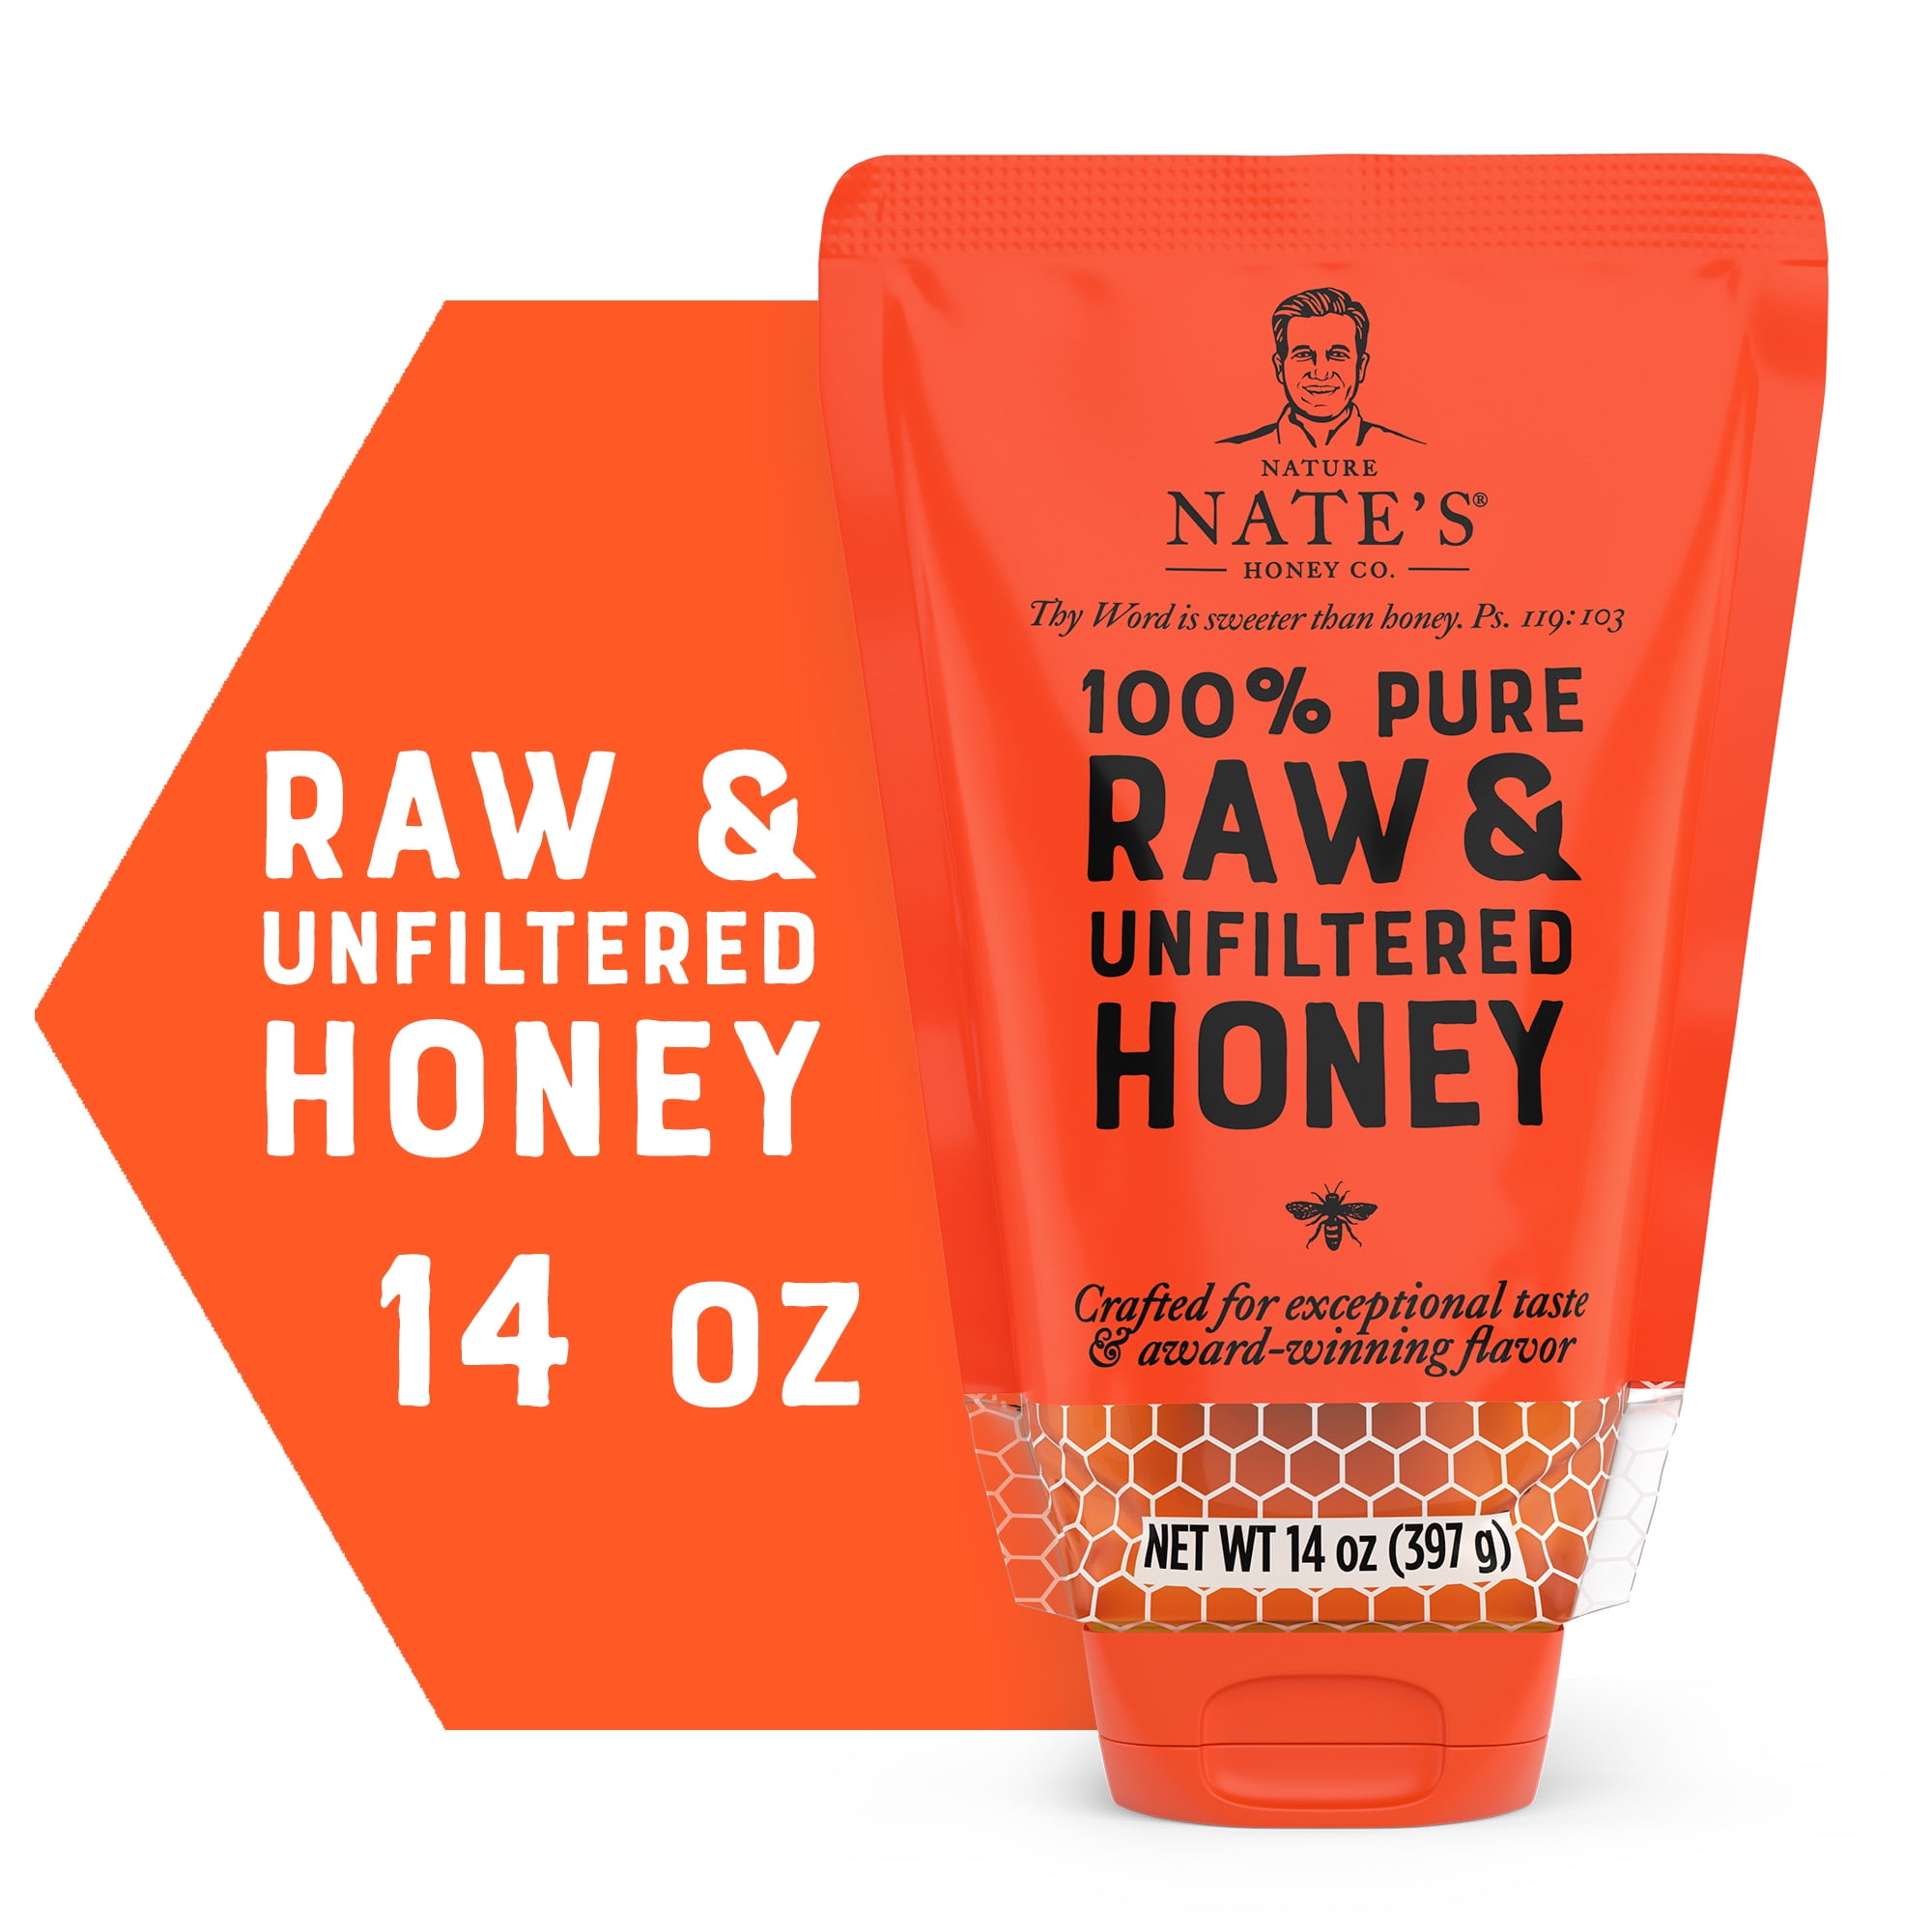 Nature Nate's Honey: 100% Pure, Raw, and Unfiltered Honey Pouch, 14 fl oz